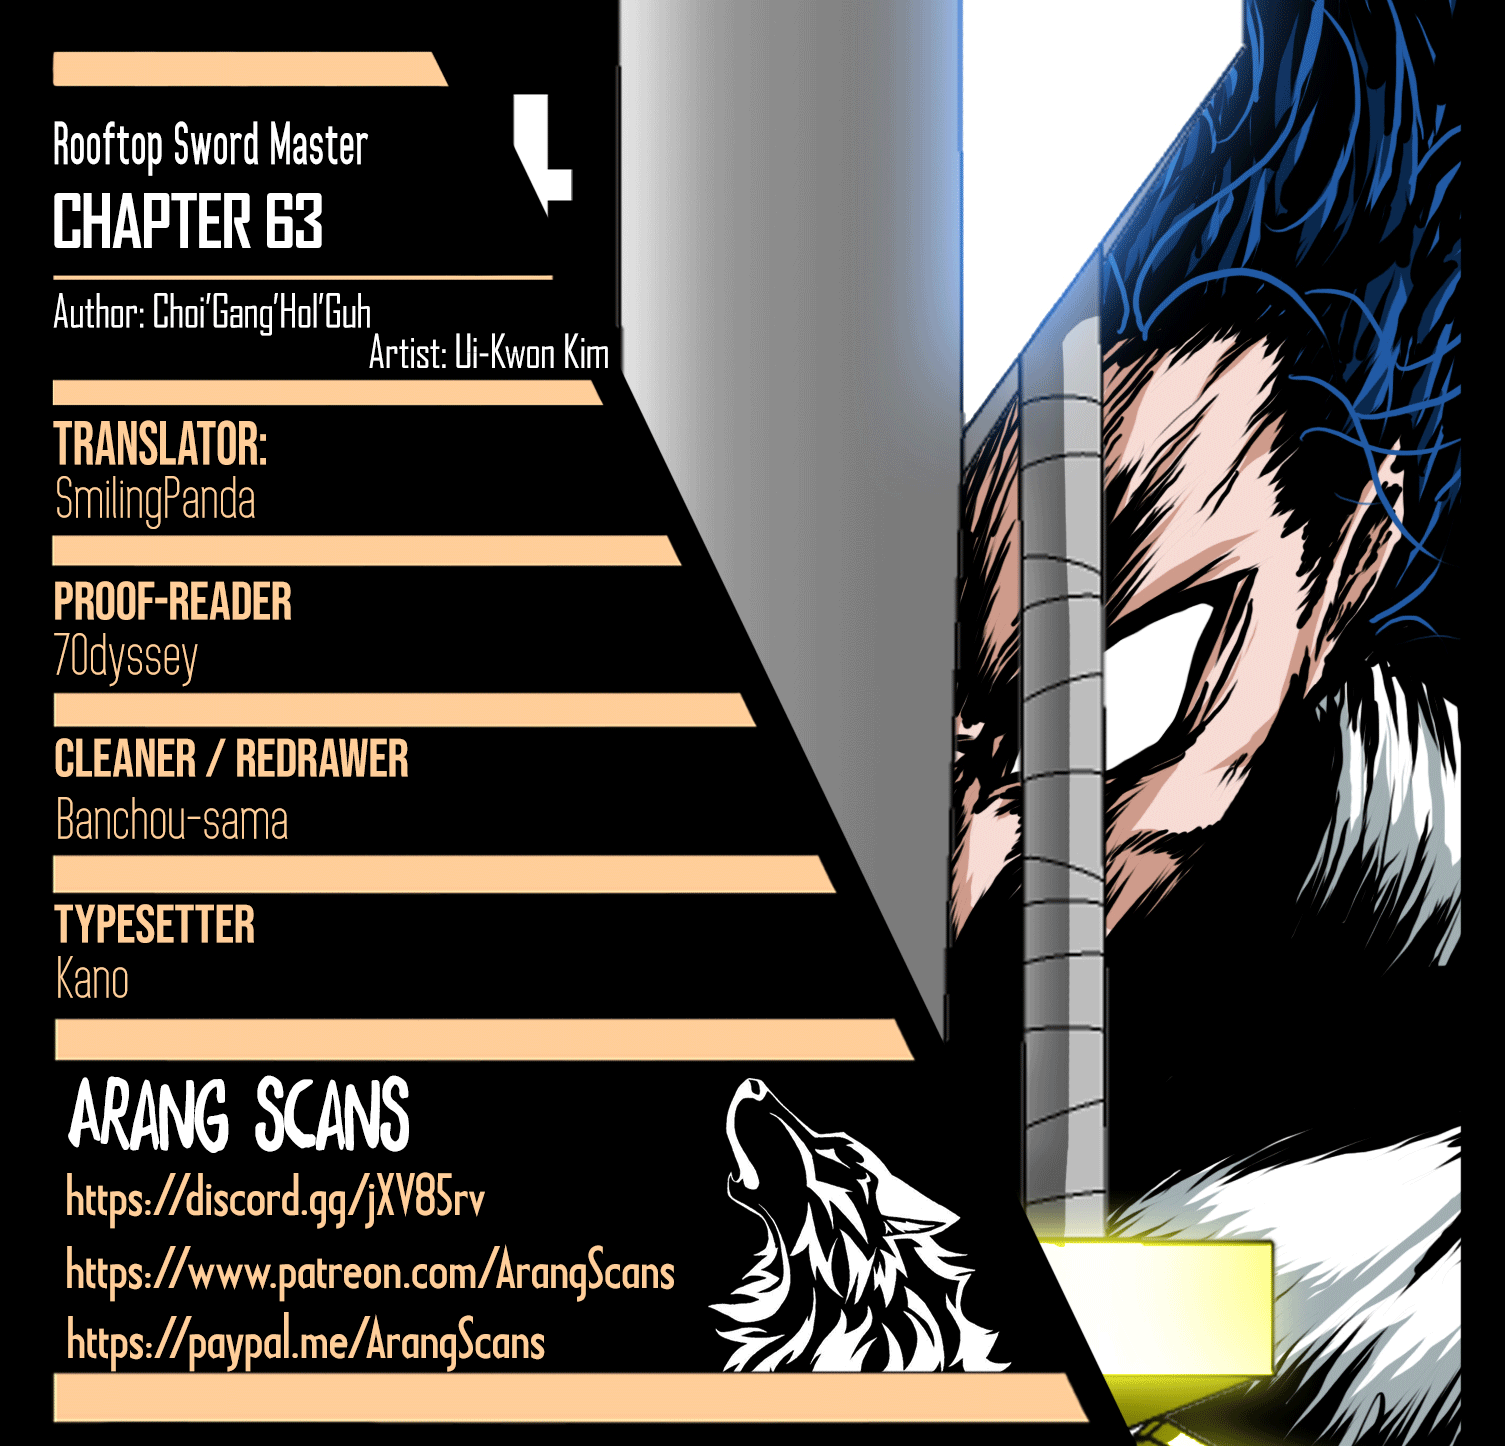 Rooftop Sword Master - Chapter 10630 - Image 1